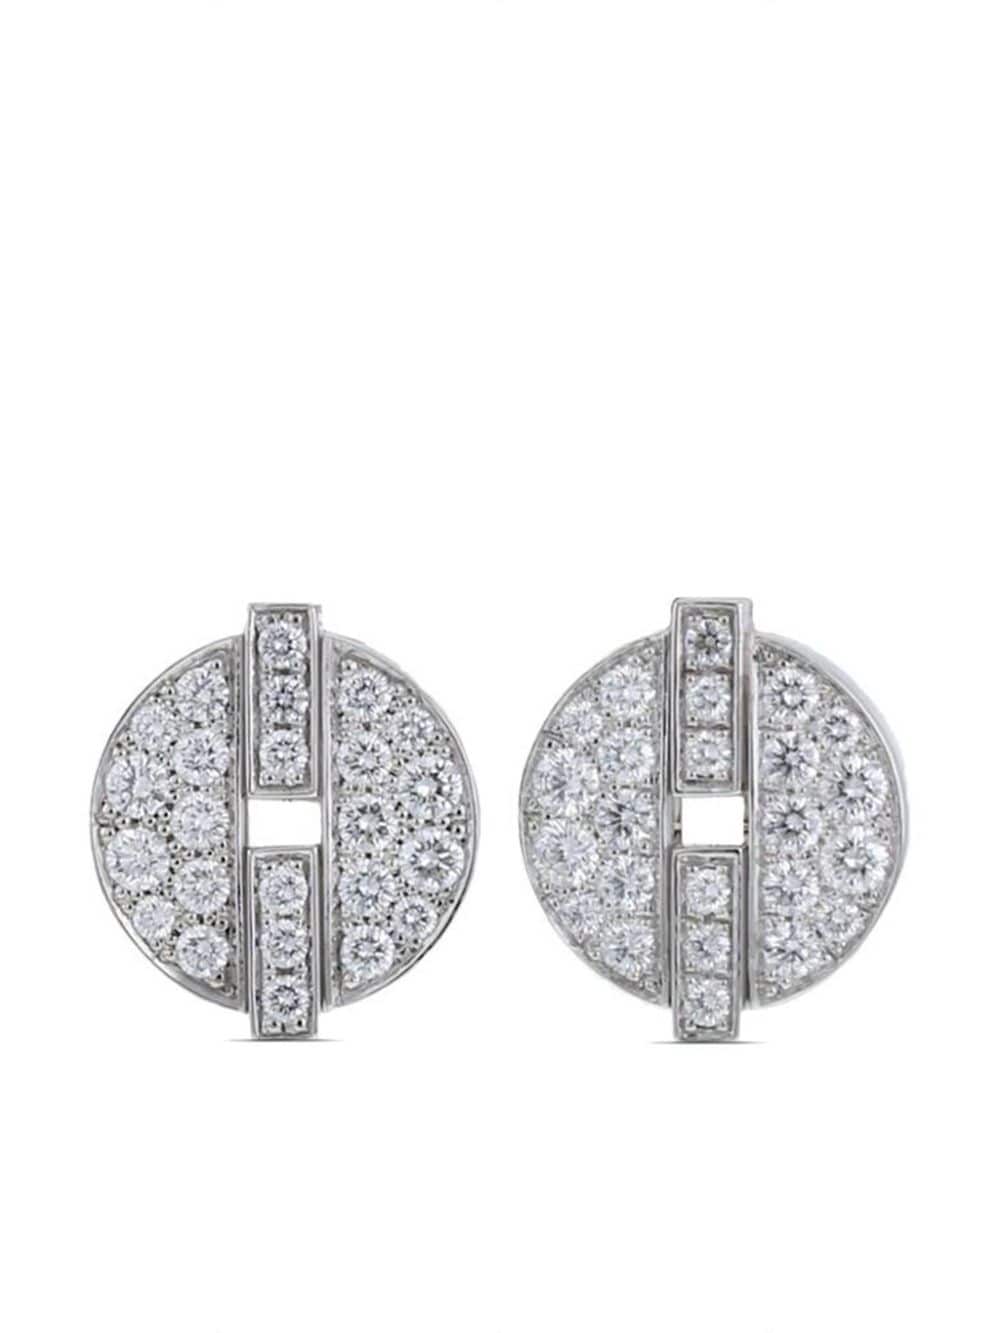 Cartier pre-owned white gold Himalia diamond earrings - Silver von Cartier